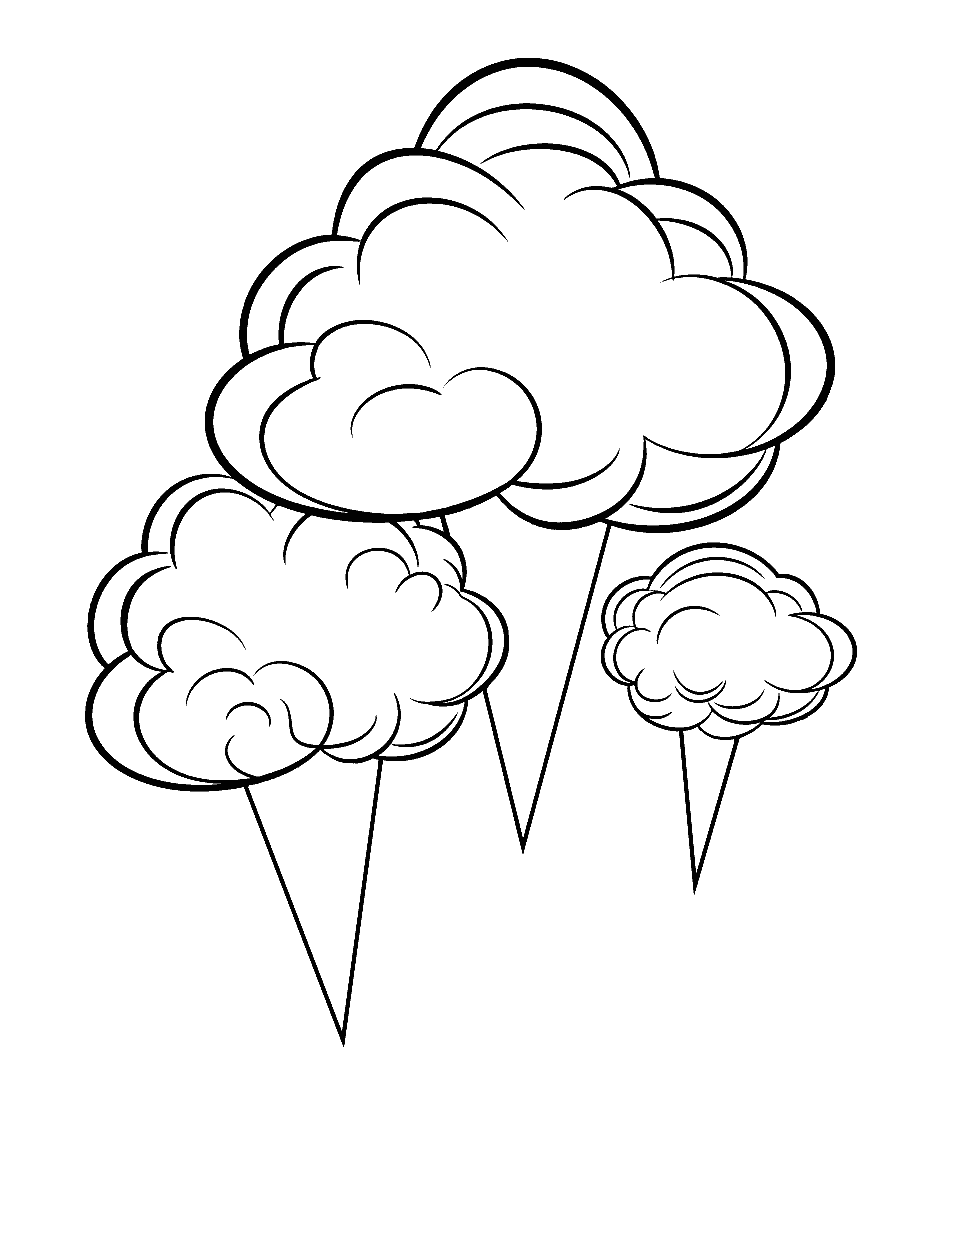 Cotton Candy Clouds Coloring Page - Fluffy cotton candy clouds floating together.